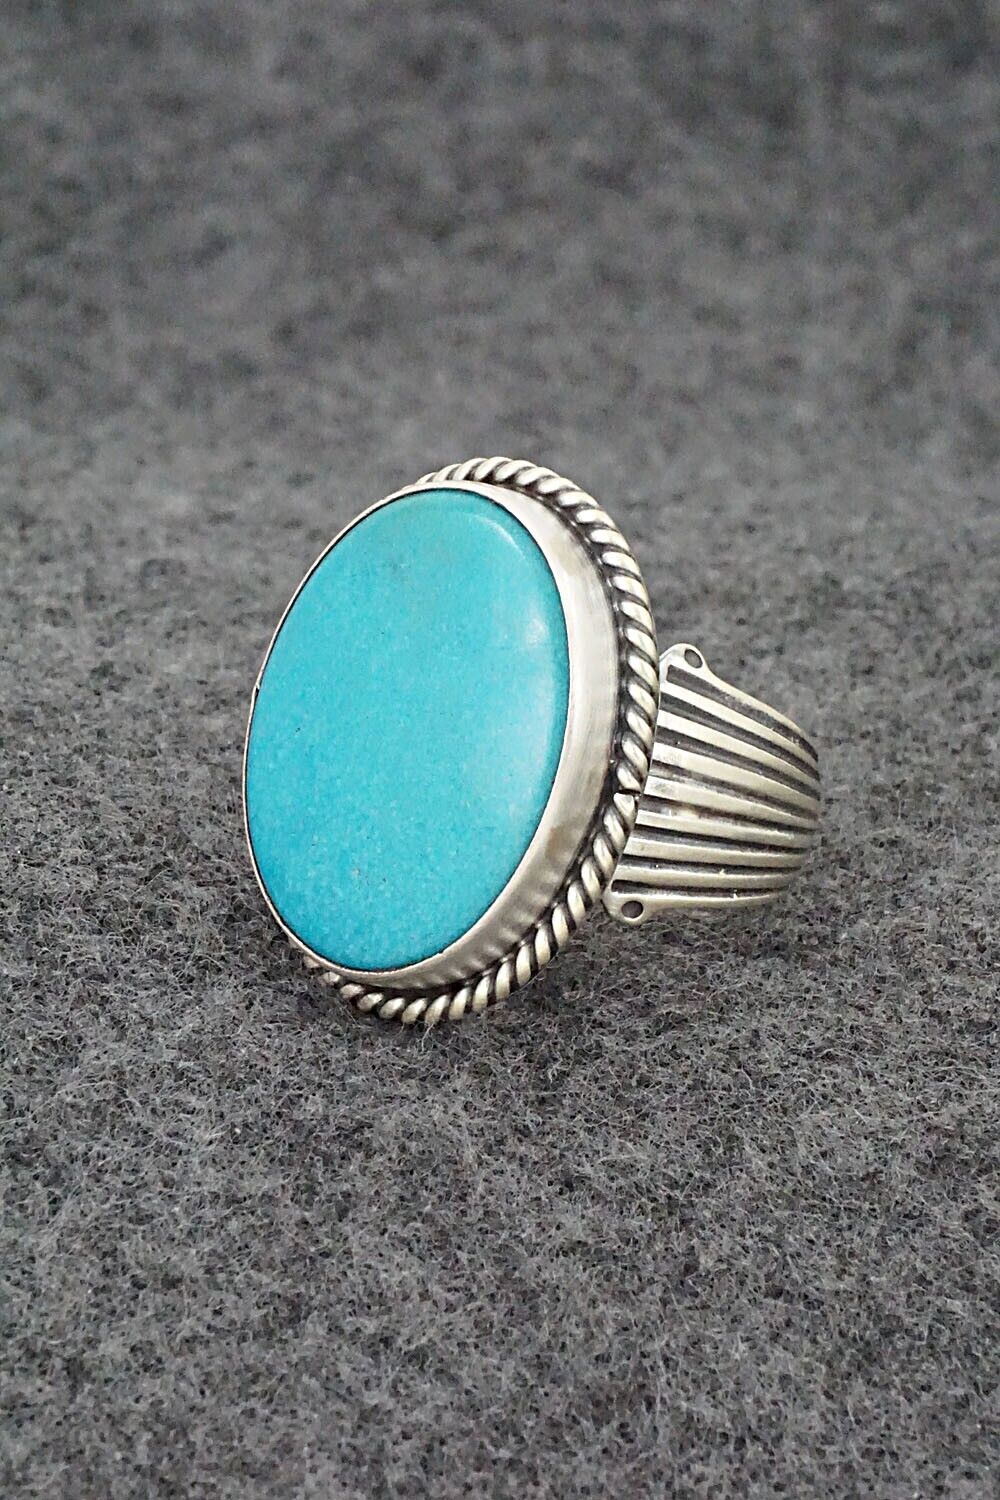 Turquoise & Sterling Silver Ring - Samuel Yellowhair - Size 7.5